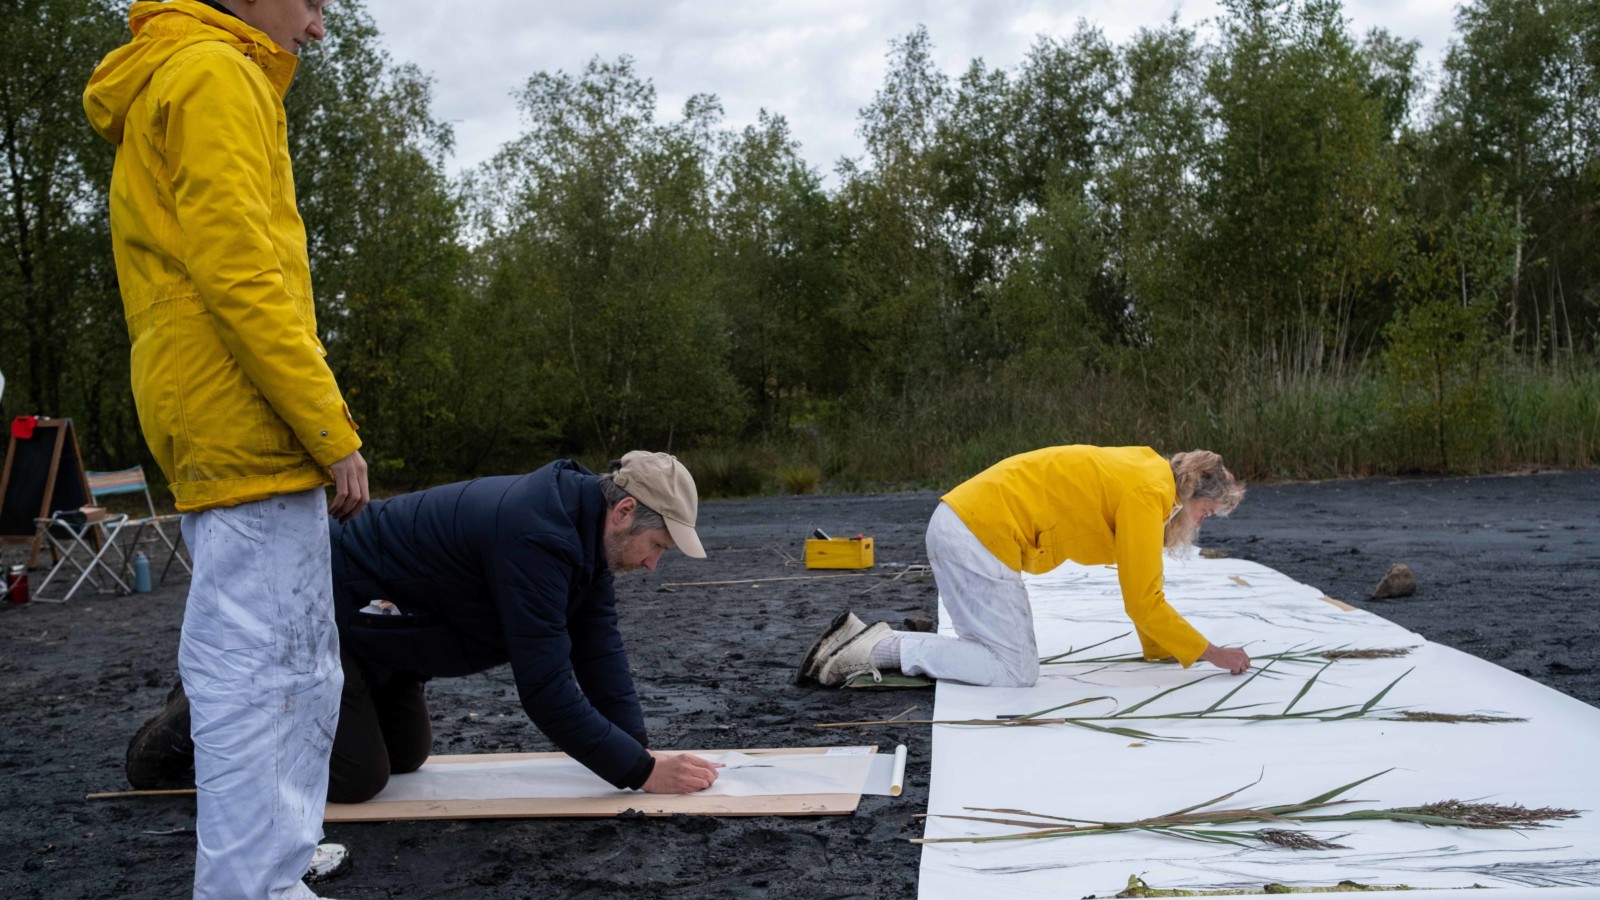 Traces Impressions and Digressions by Kerry Morrison is photographed taking place on the Slag heap at Colliers moss, Kerry is placing stalks on a large roll of paper and a man is doing a charcoal rubbing of of a stalk.